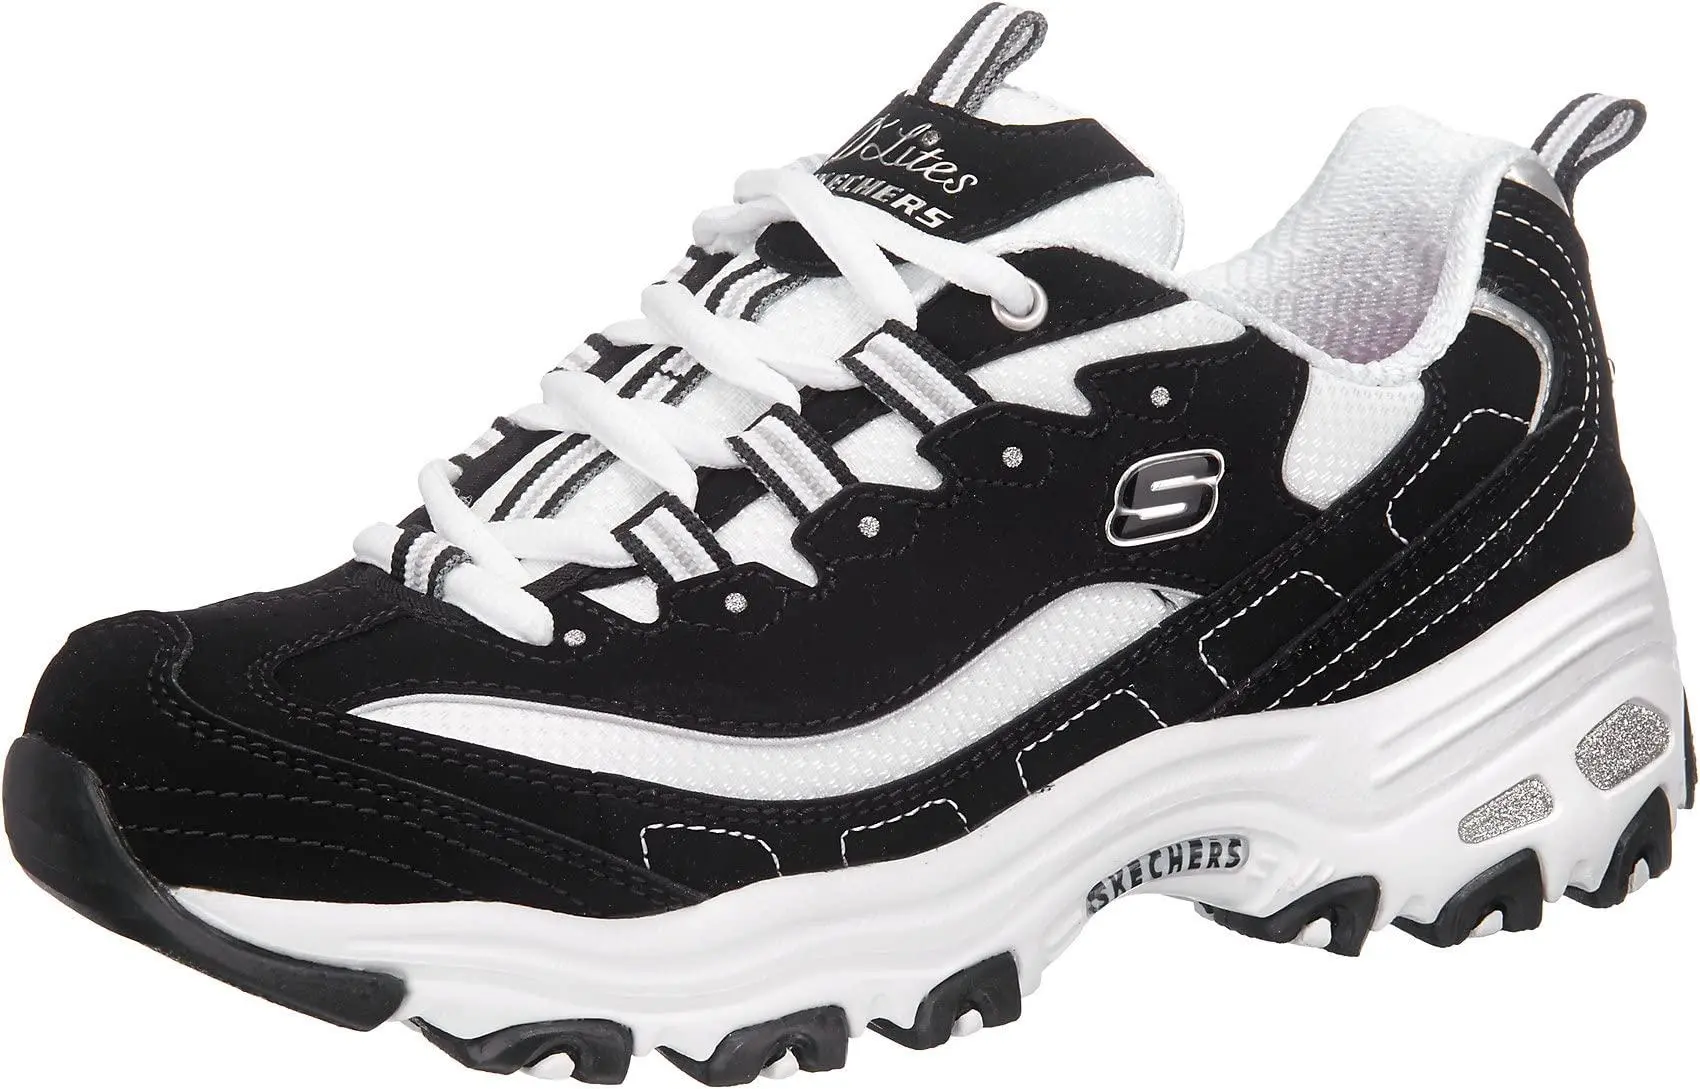 Sneakers / Trainer from Skechers for Women in White| Stylight